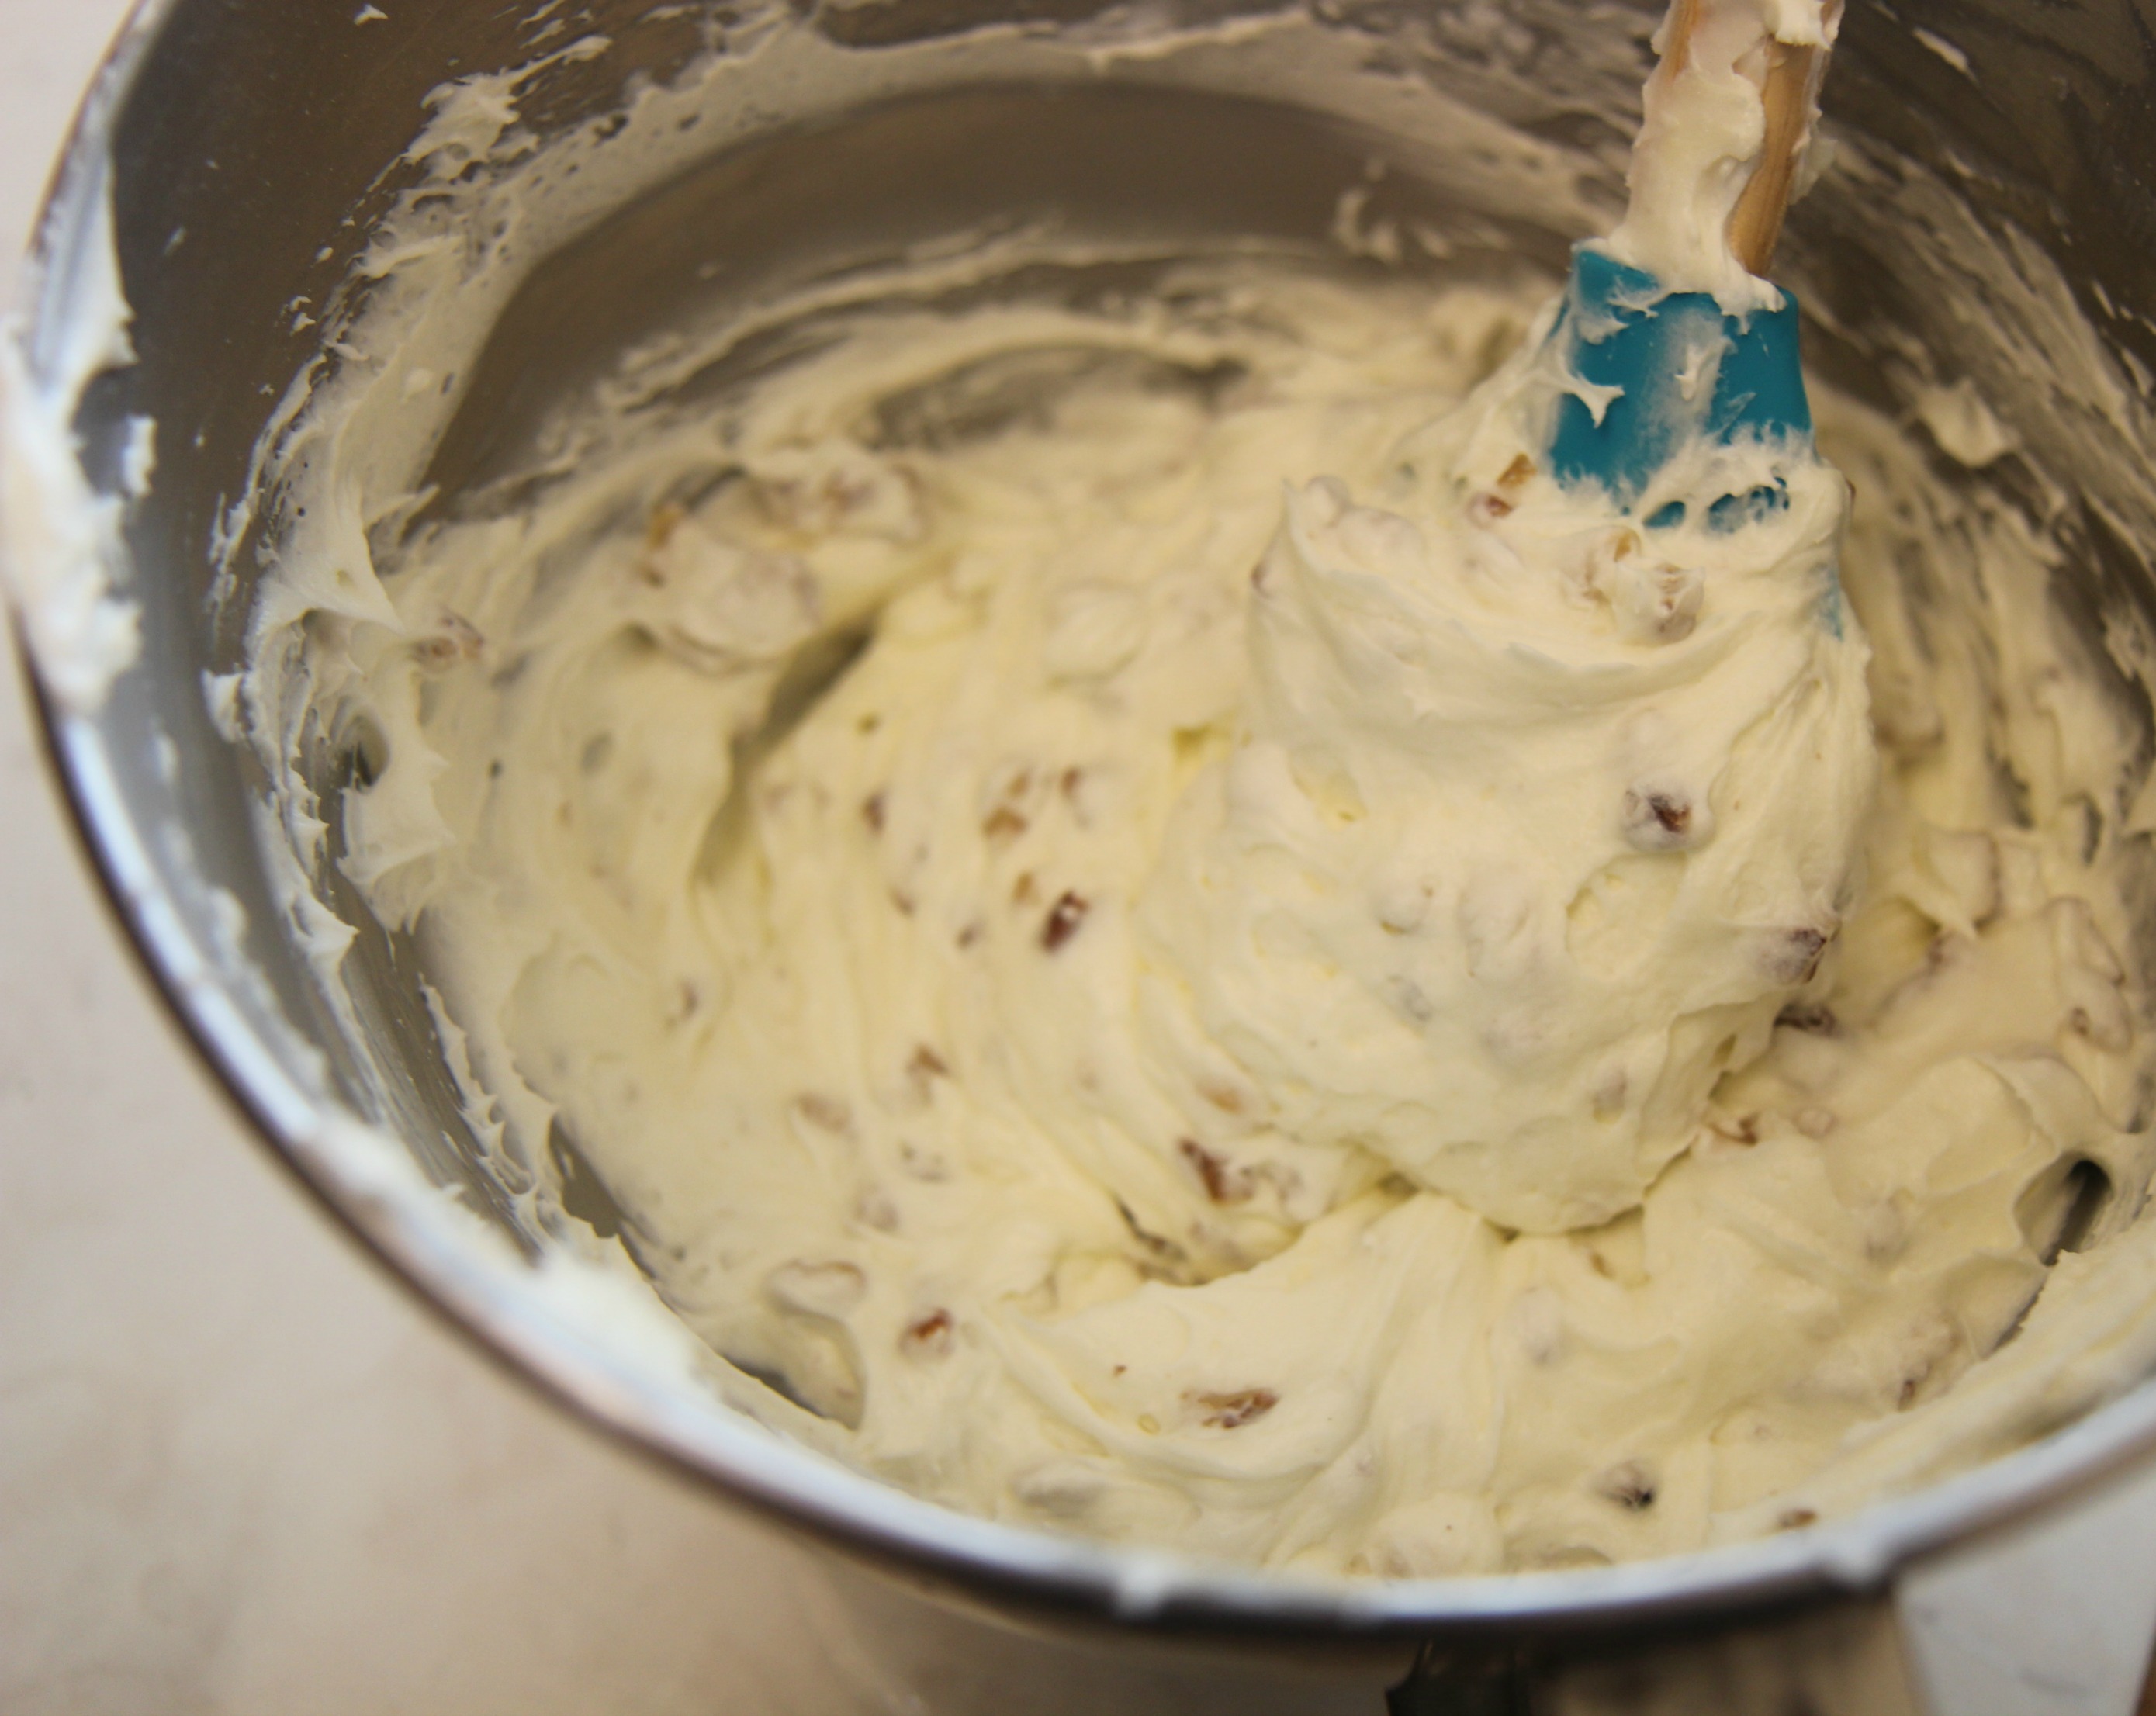 Whip the frosting and nuts together.